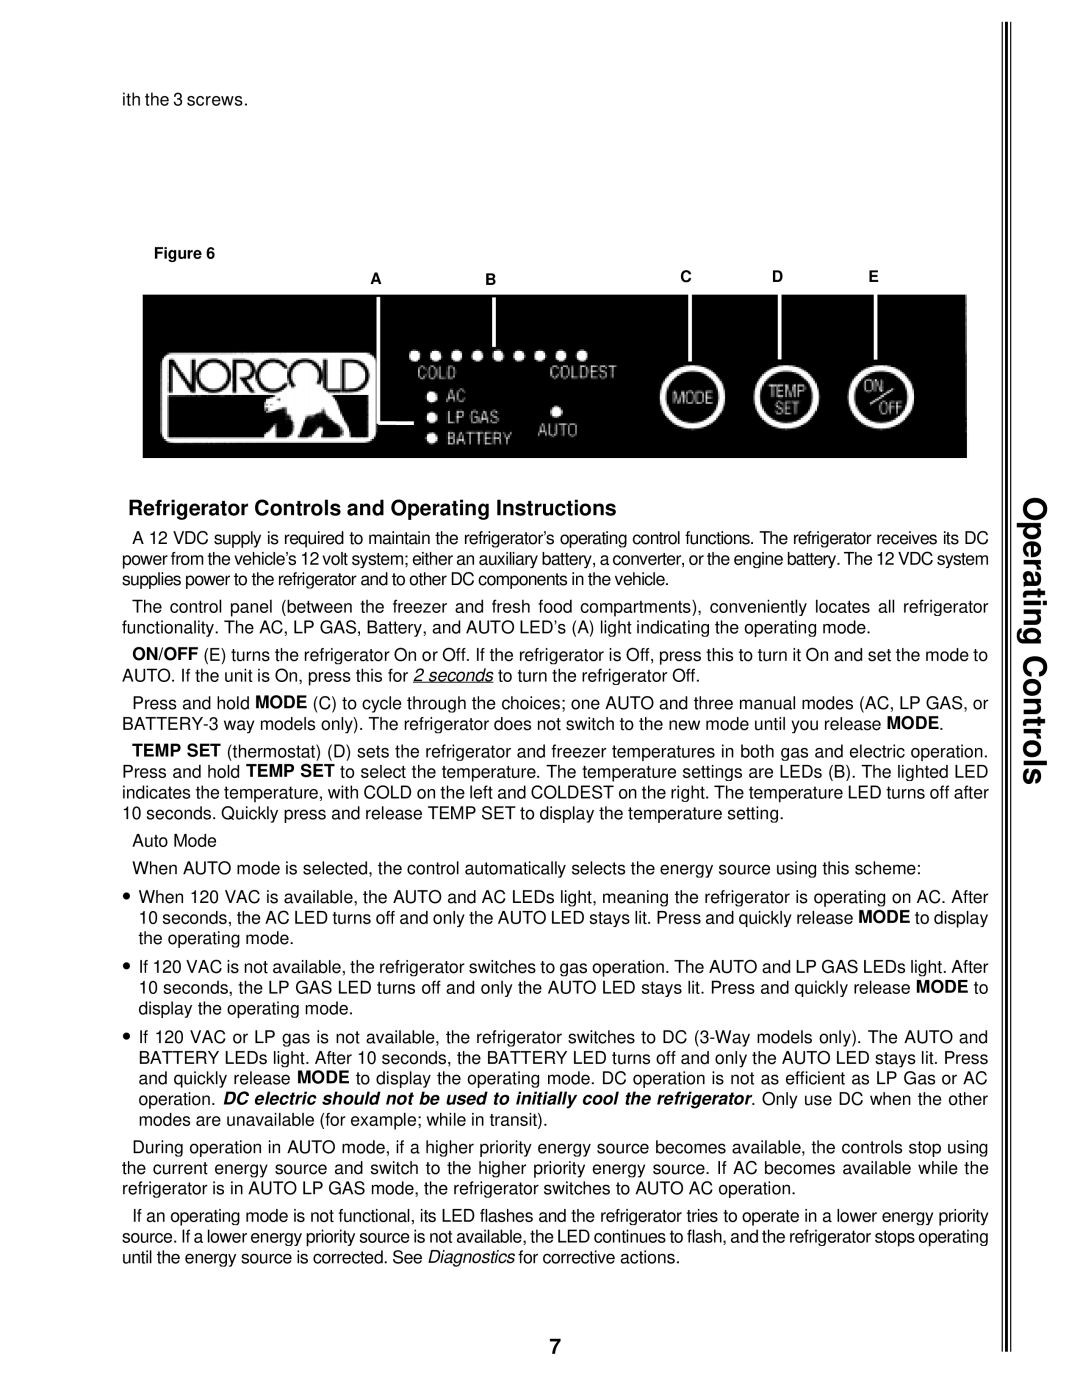 Norcold 9183, 9162, 9163, 9182 manual Operating Controls, Refrigerator Controls and Operating Instructions 